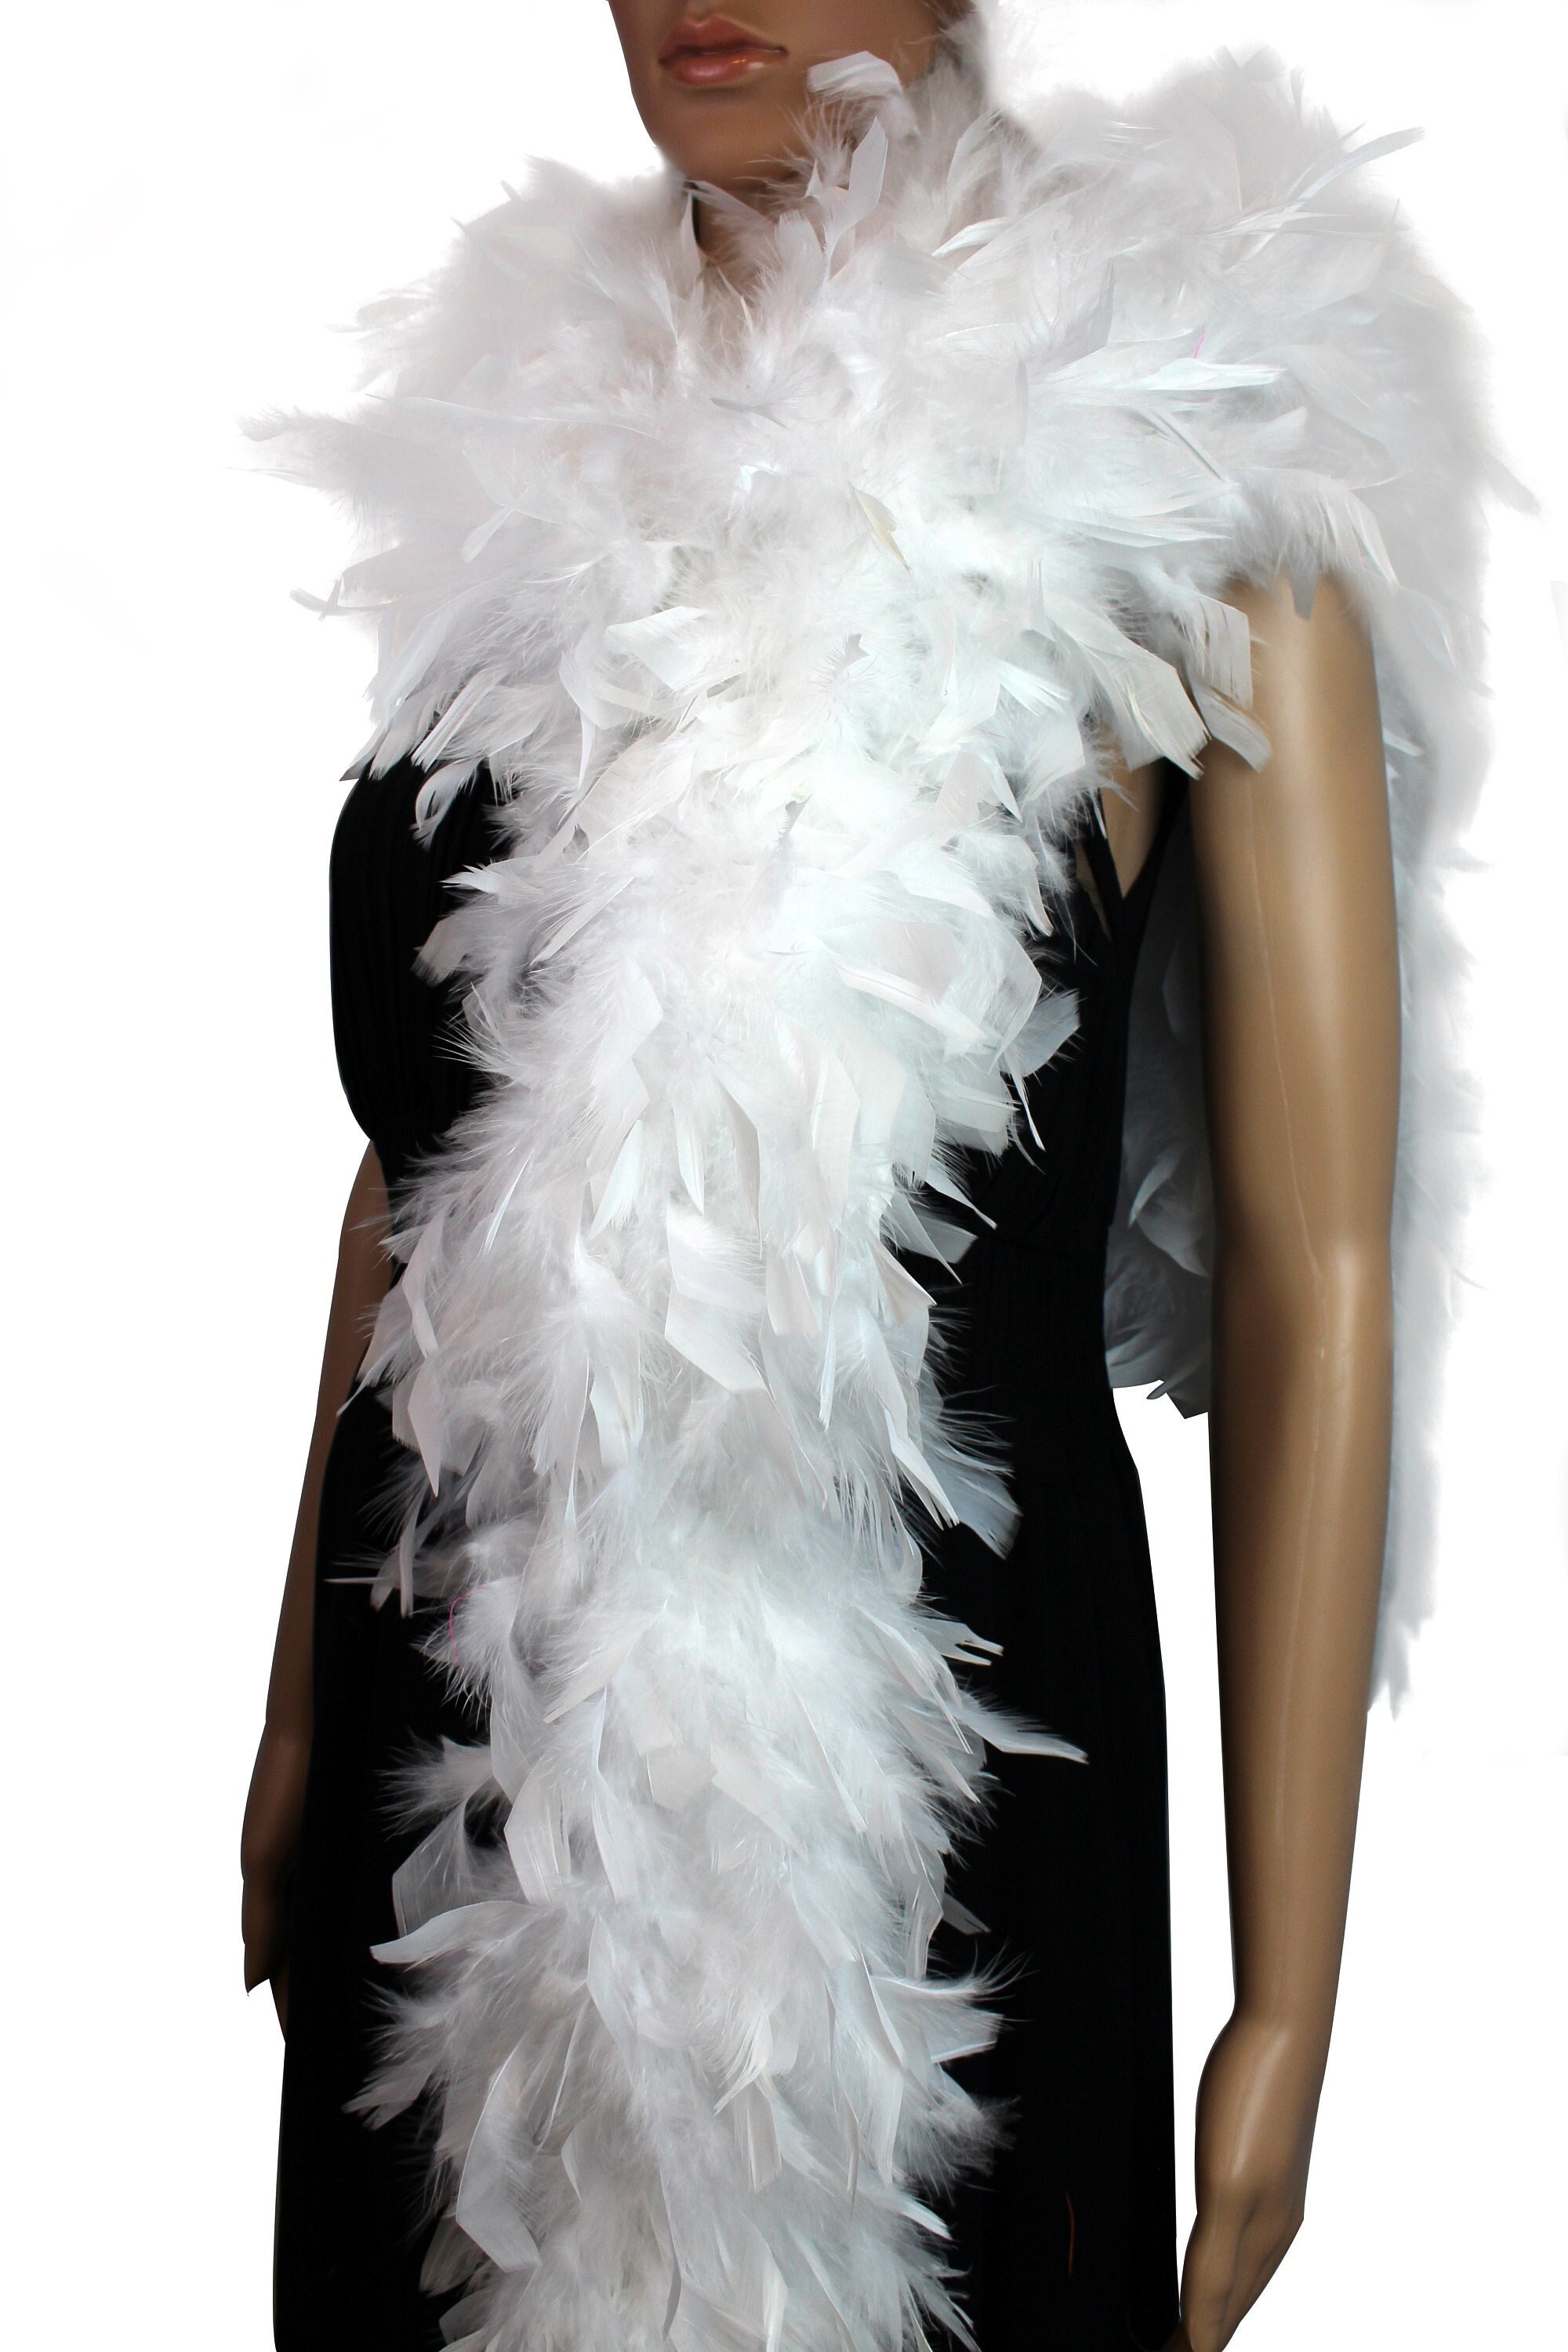 flydreamfeathers White 100 Gram Chandelle Feather Boa, 2 Yard Long-Great for Party, Wedding, Costume